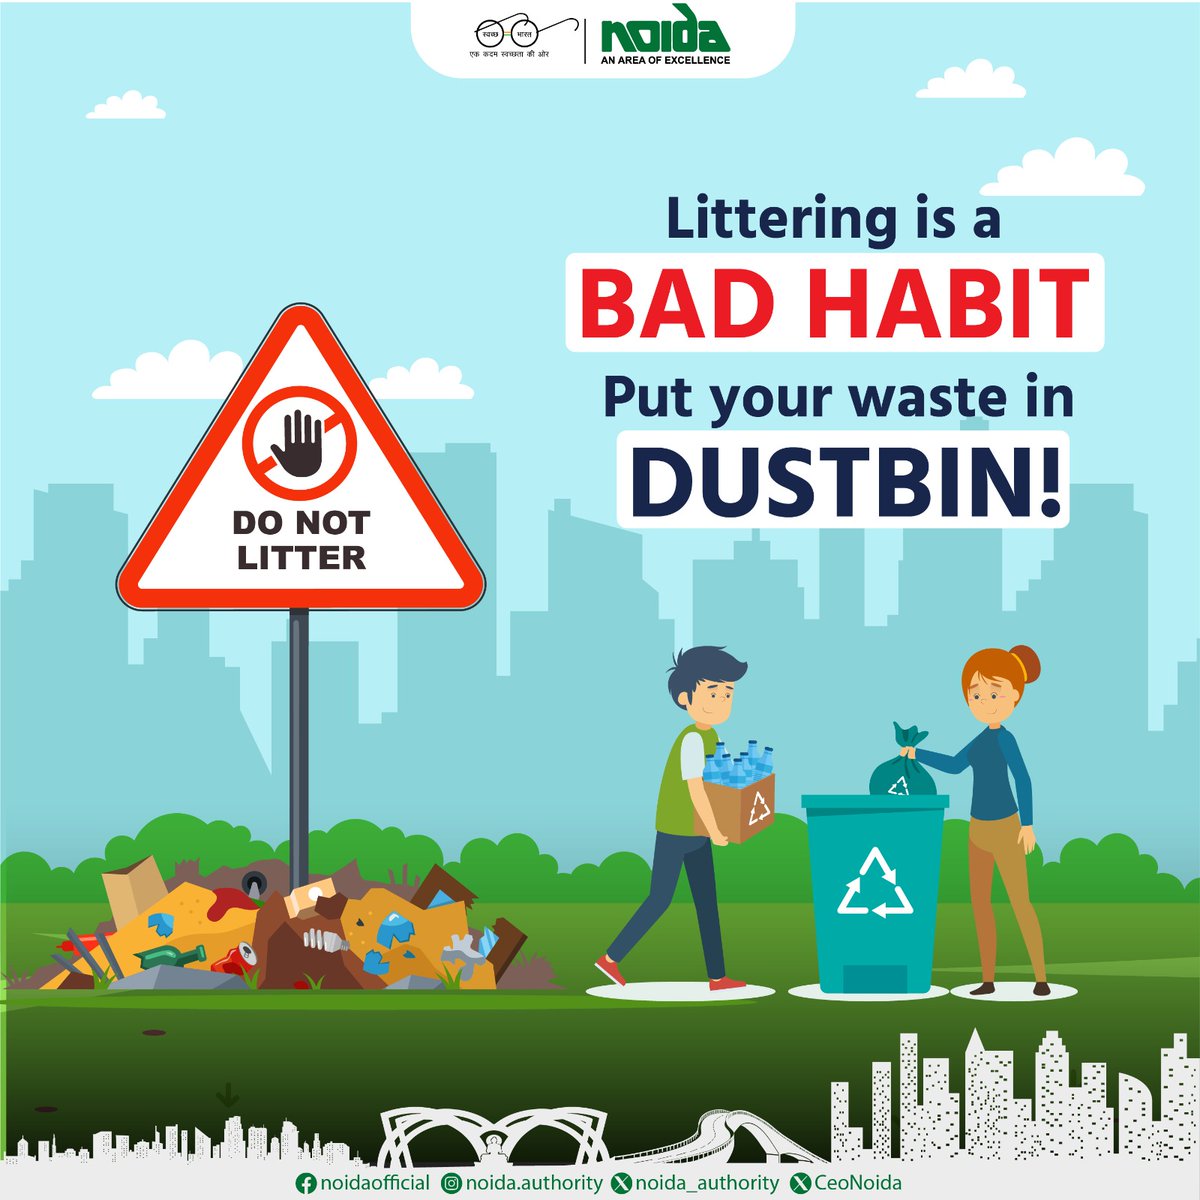 LITTERING IS A BAD HABIT. PUT YOUR WASTE IN DUSTBIN!!! Let's keep Noida clean and beautiful together.✨ #NoidaAuthority #SayNoToLittering #CleanNoidaGreenNoida